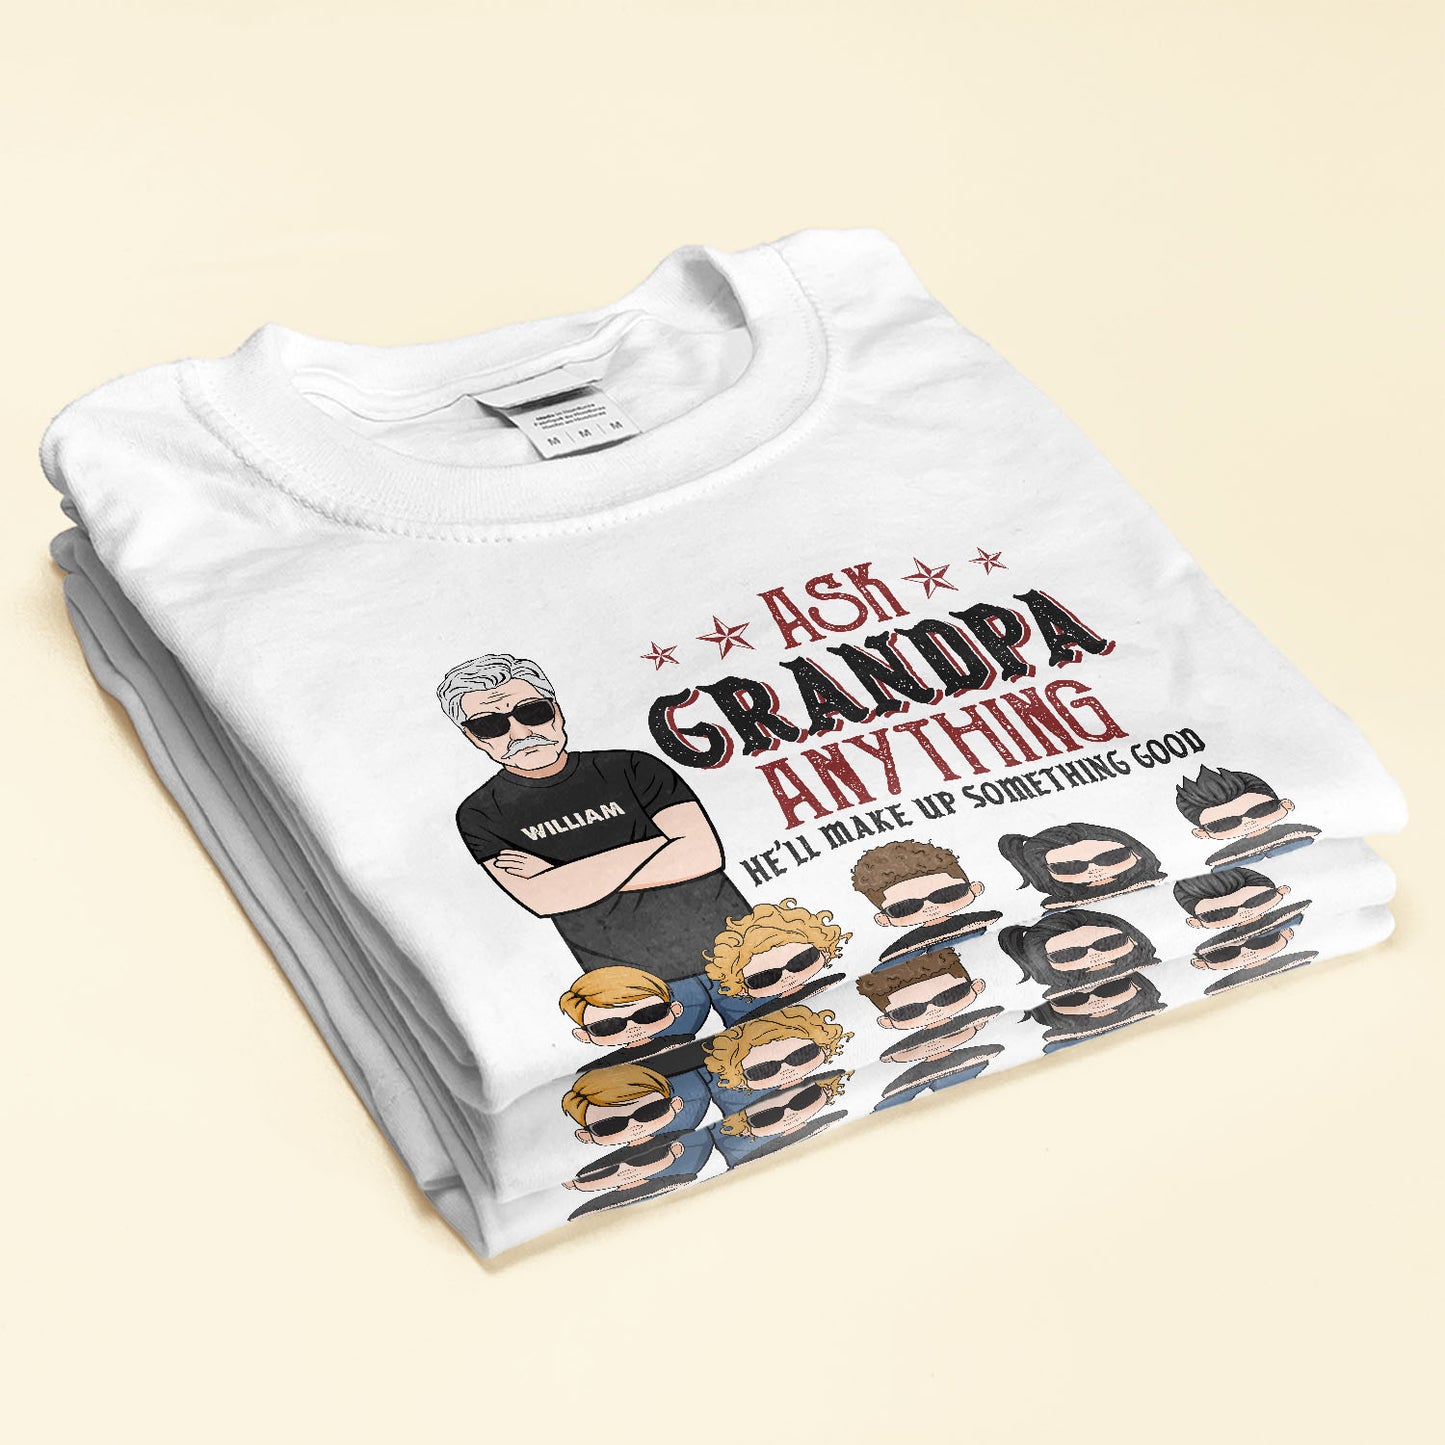 Ask Grandpa Anything - Personalized Shirt - Birthday, Father's Day Gift For Papa, Grandpa, Grandfather